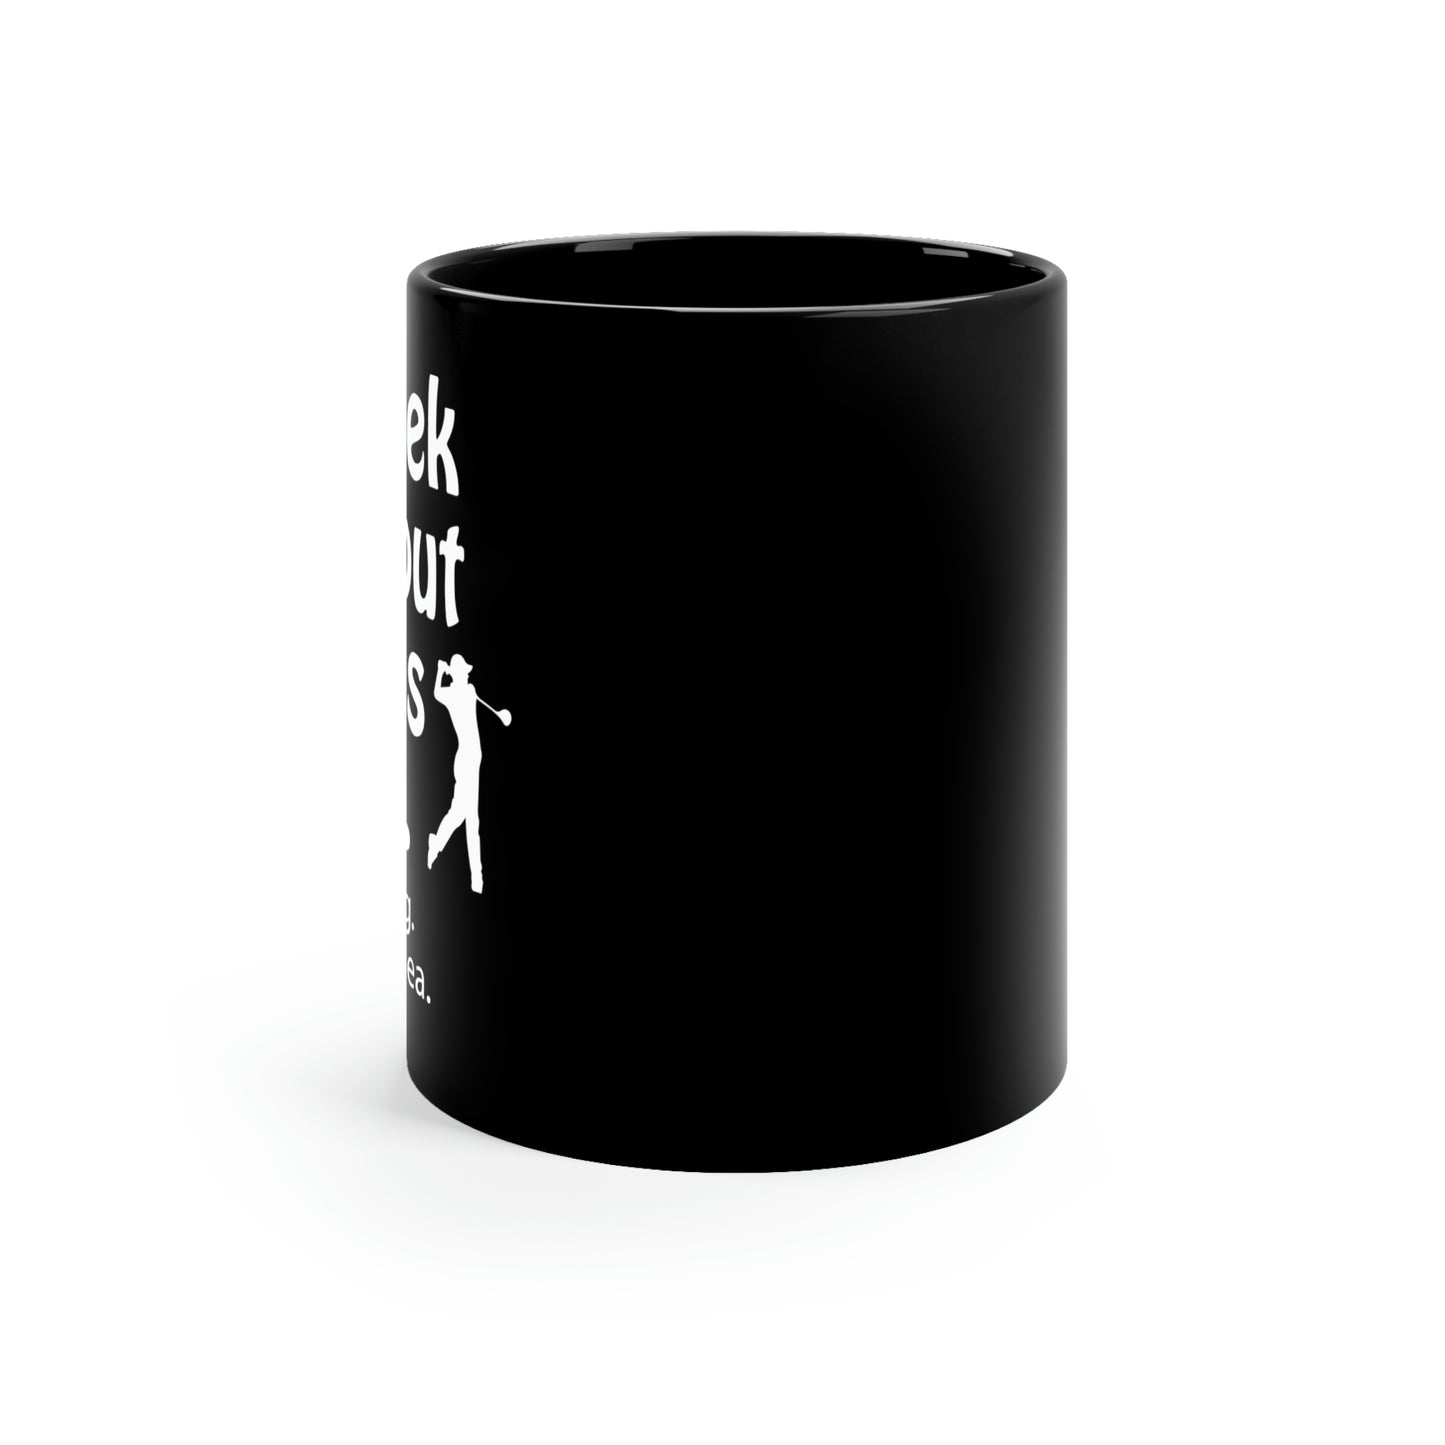 What does a week without golf feel like? (I don't wanna know) Black ceramic mug